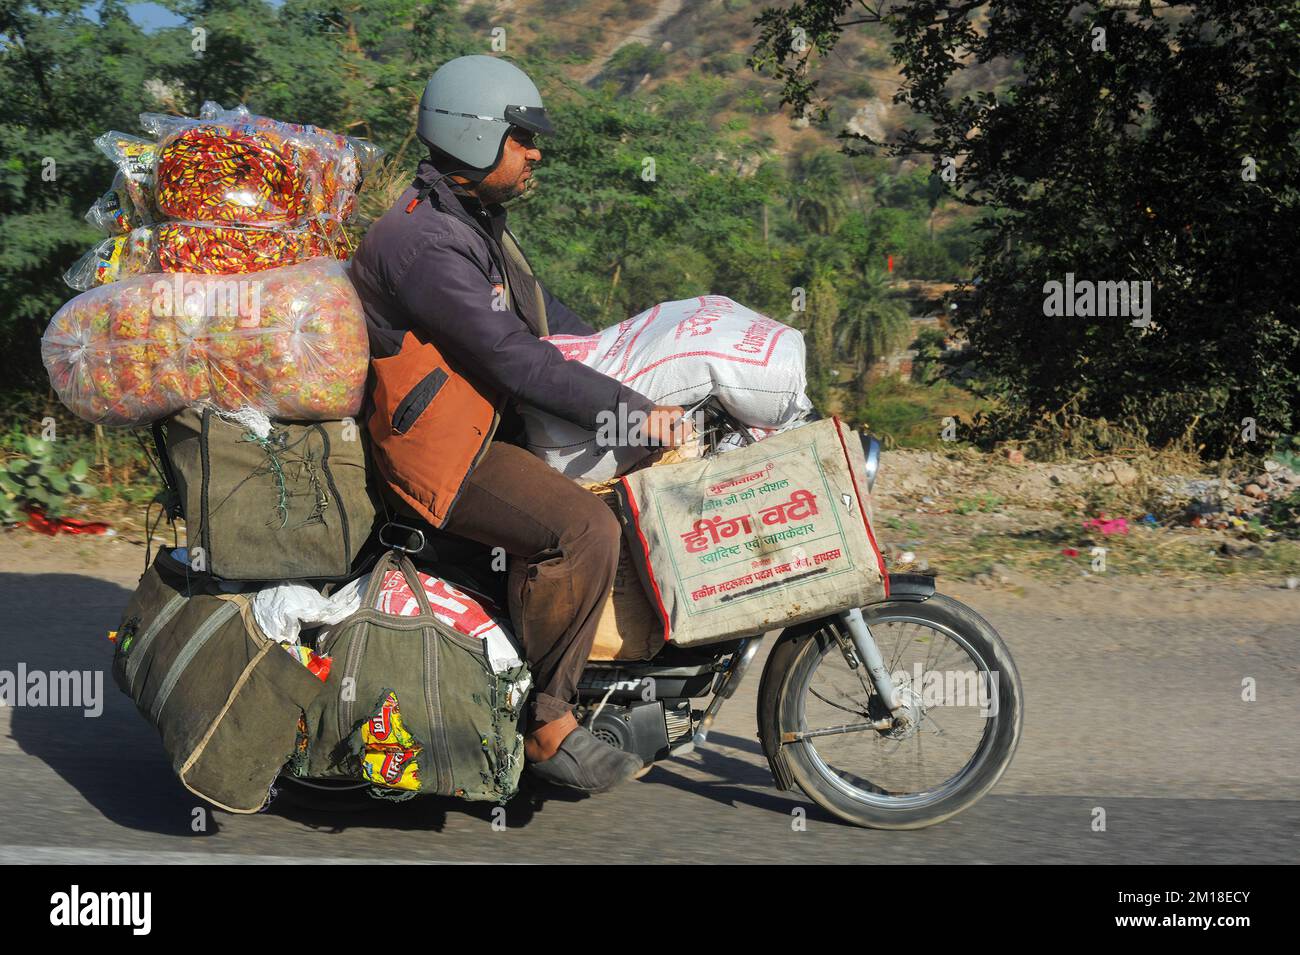 Man transporting goods on an overloaded motorcycle. Jaipur, India Stock Photo